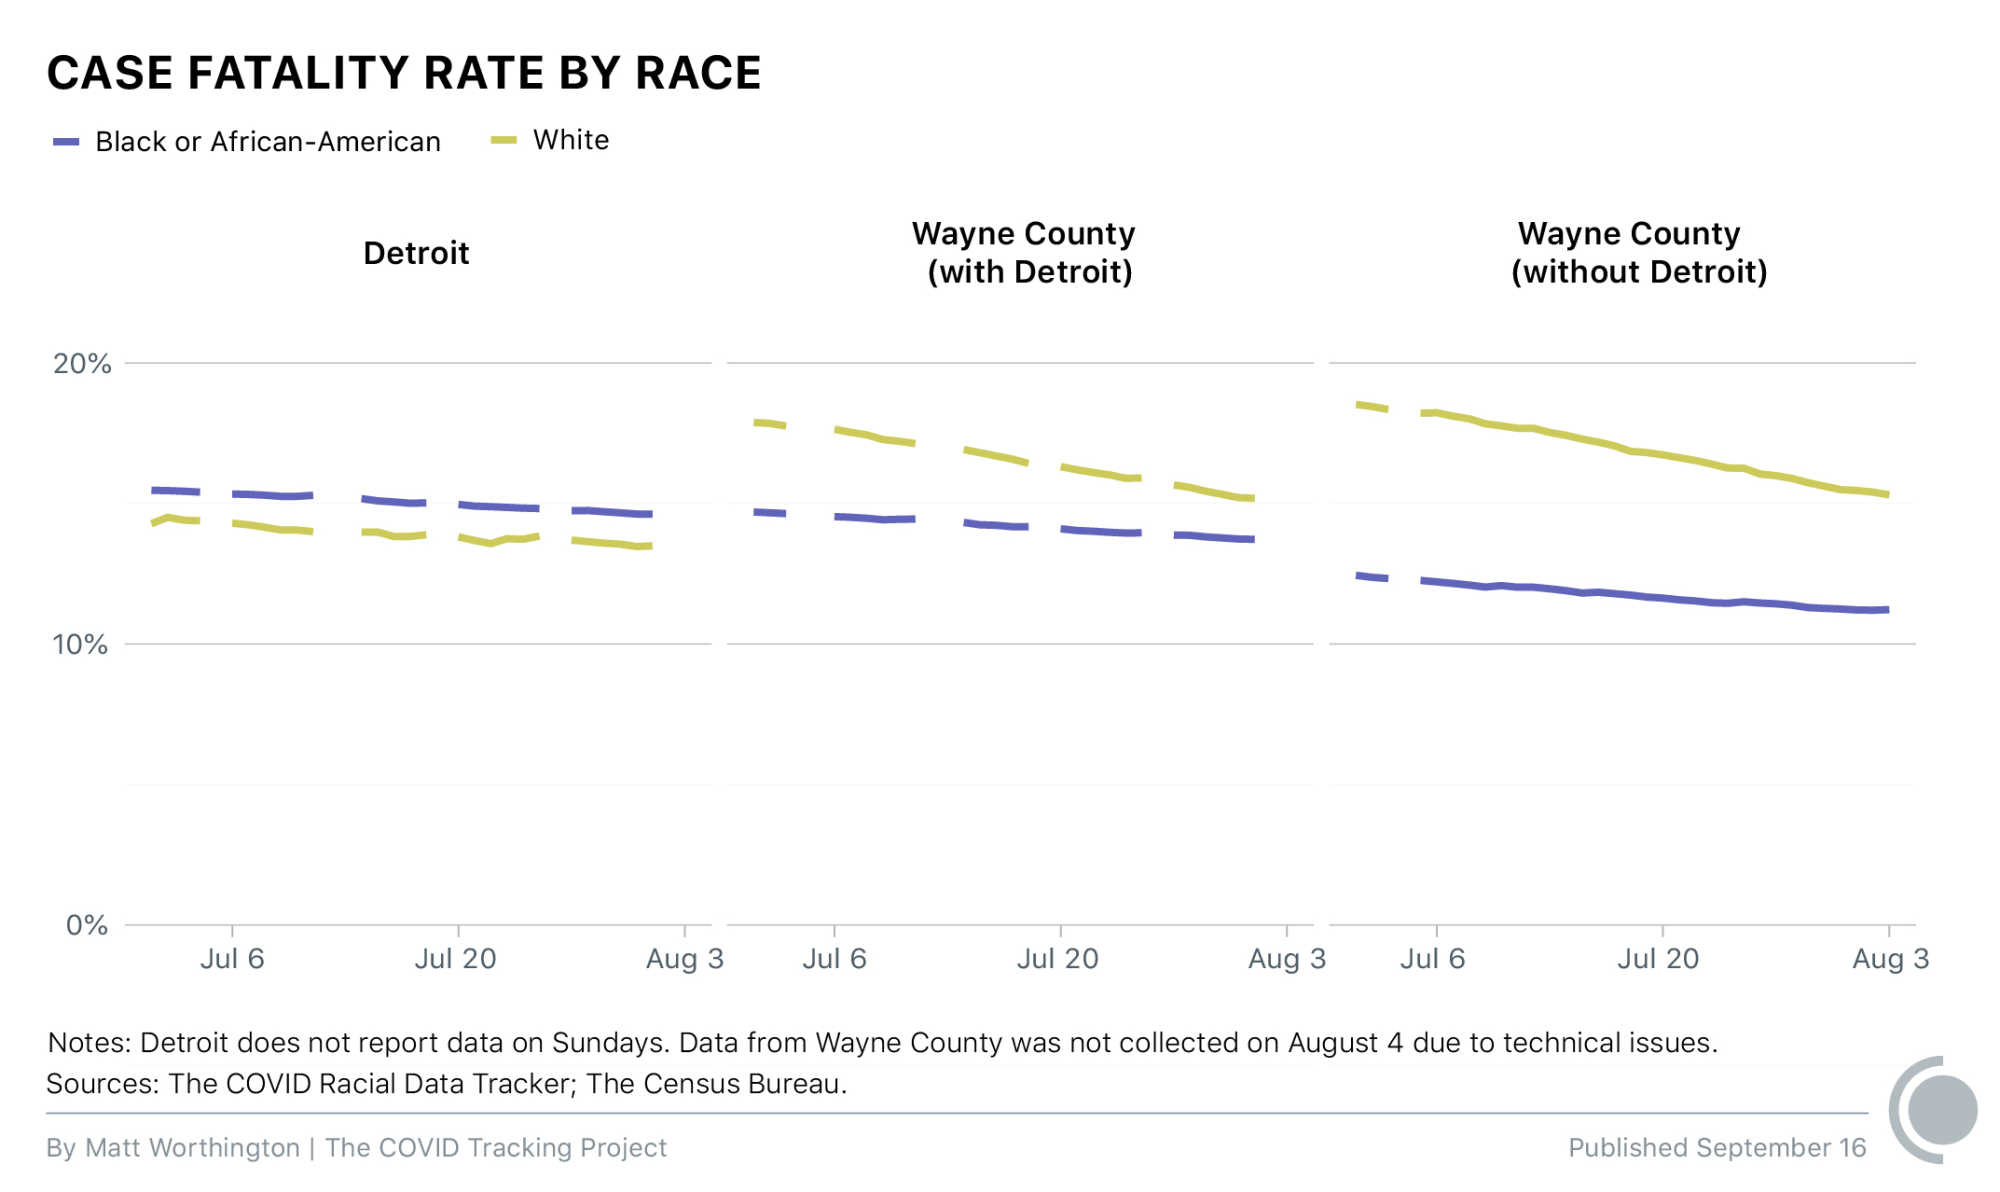 Displays the relative case fatality rate for Black or African American people compared to for White people in Detroit, Wayne County with Detroit, and Wayne County without Detroit, from June through August 2020.